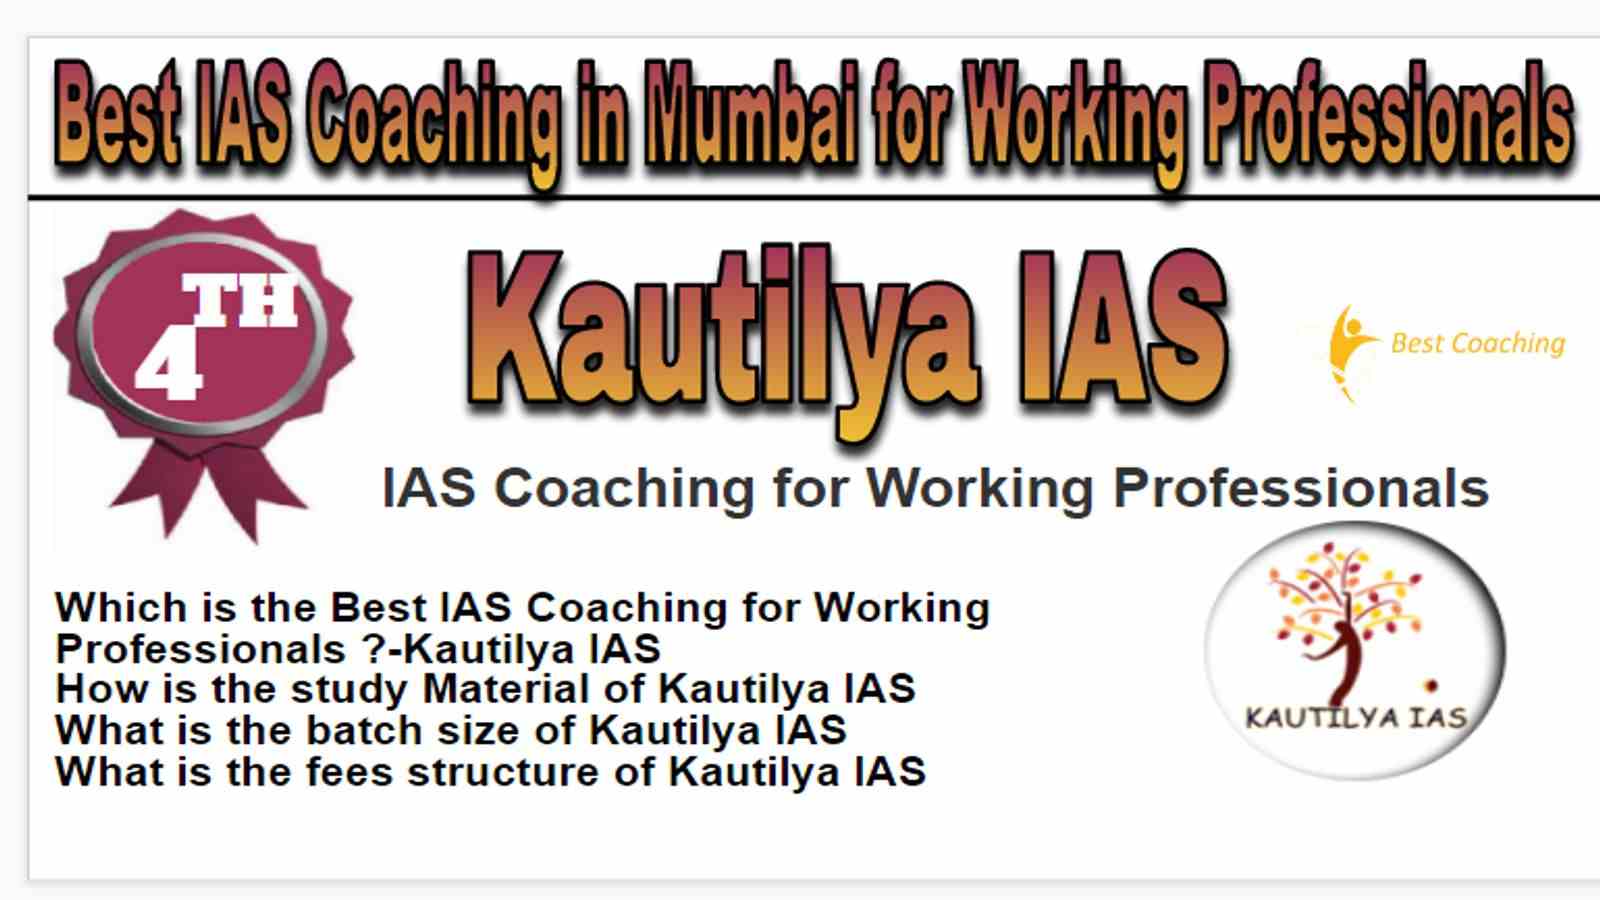 Rank 4 Best IAS Coaching in Mumbai for Working Professionals